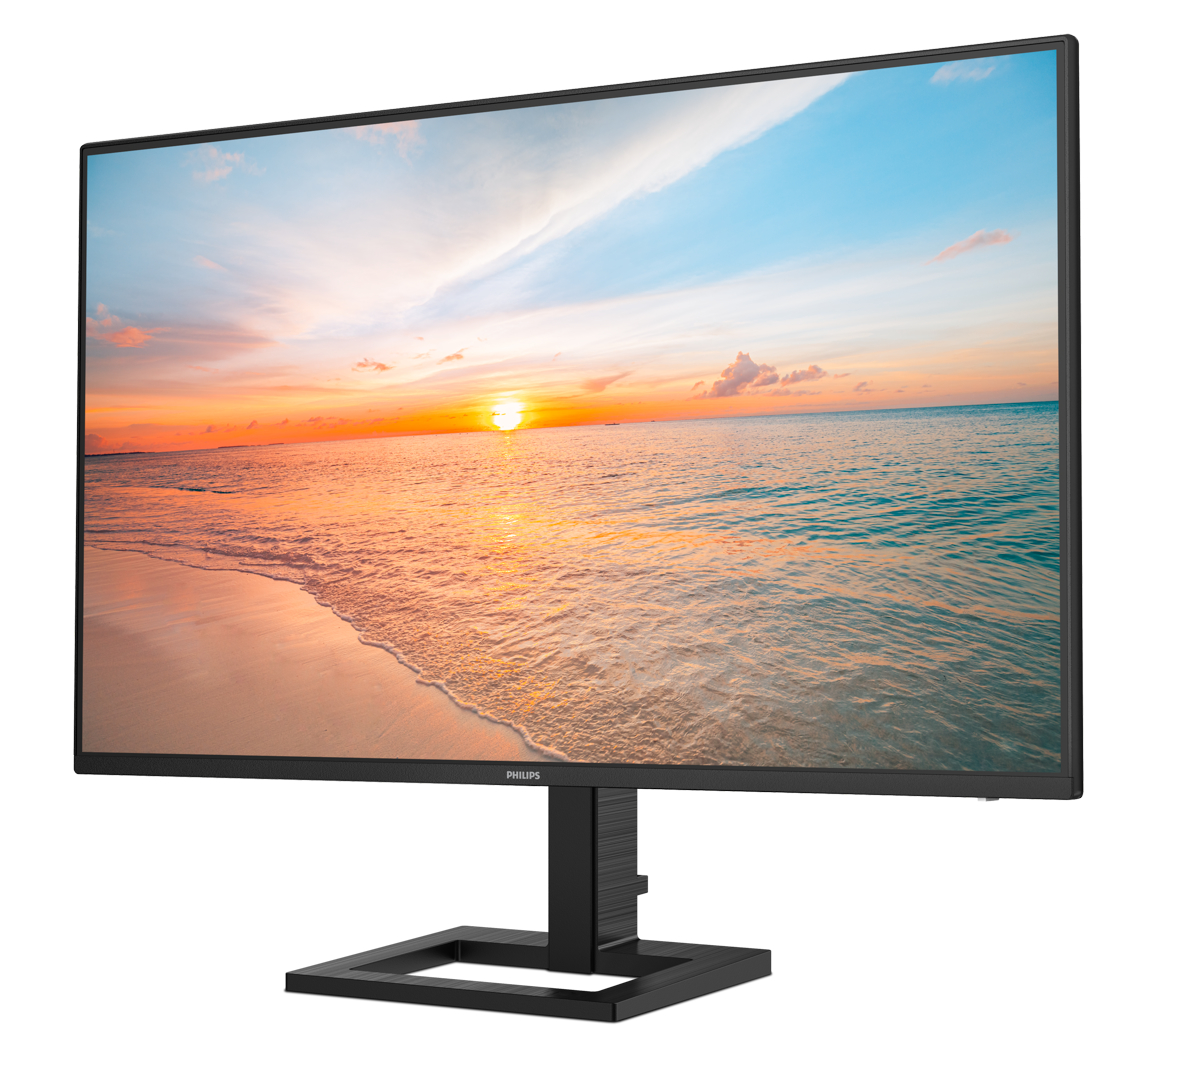 Philips monitor with 100 Hz and USB Type-C 65 W charging